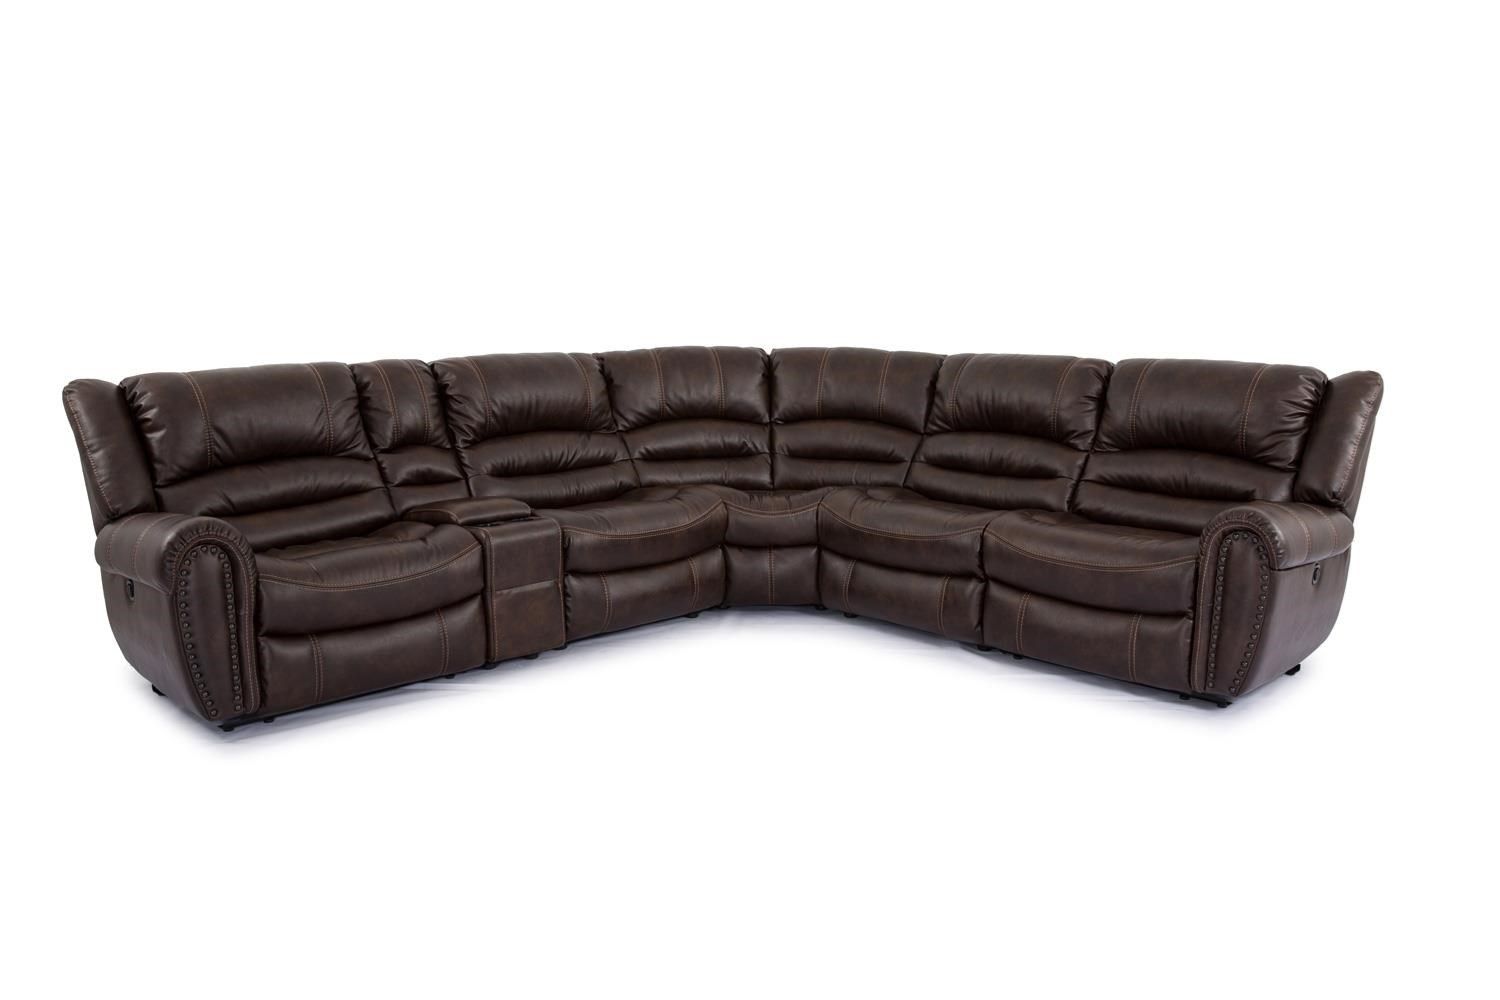 Cheers Sofa Cheers Sofa 6 Piece Sectional | Boulevard Home Pertaining To 6 Piece Leather Sectional Sofas (View 5 of 10)